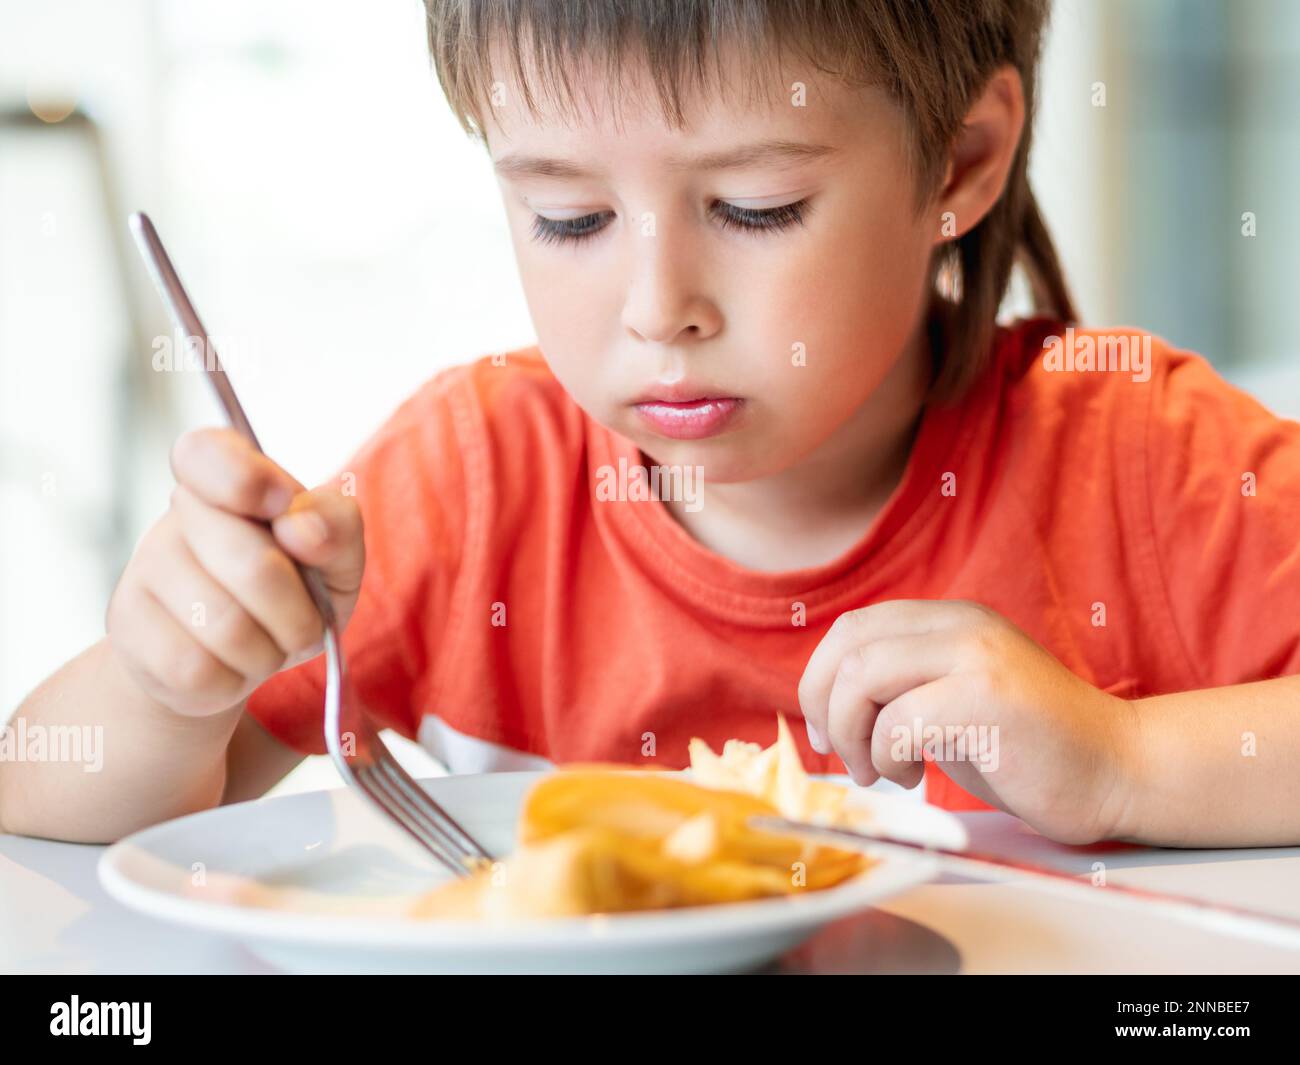 Little kid in red t-shirt eats pancakes with knife and fork. Curious boy with puzzled expression on face. Tasty pastry for breakfast. Stock Photo